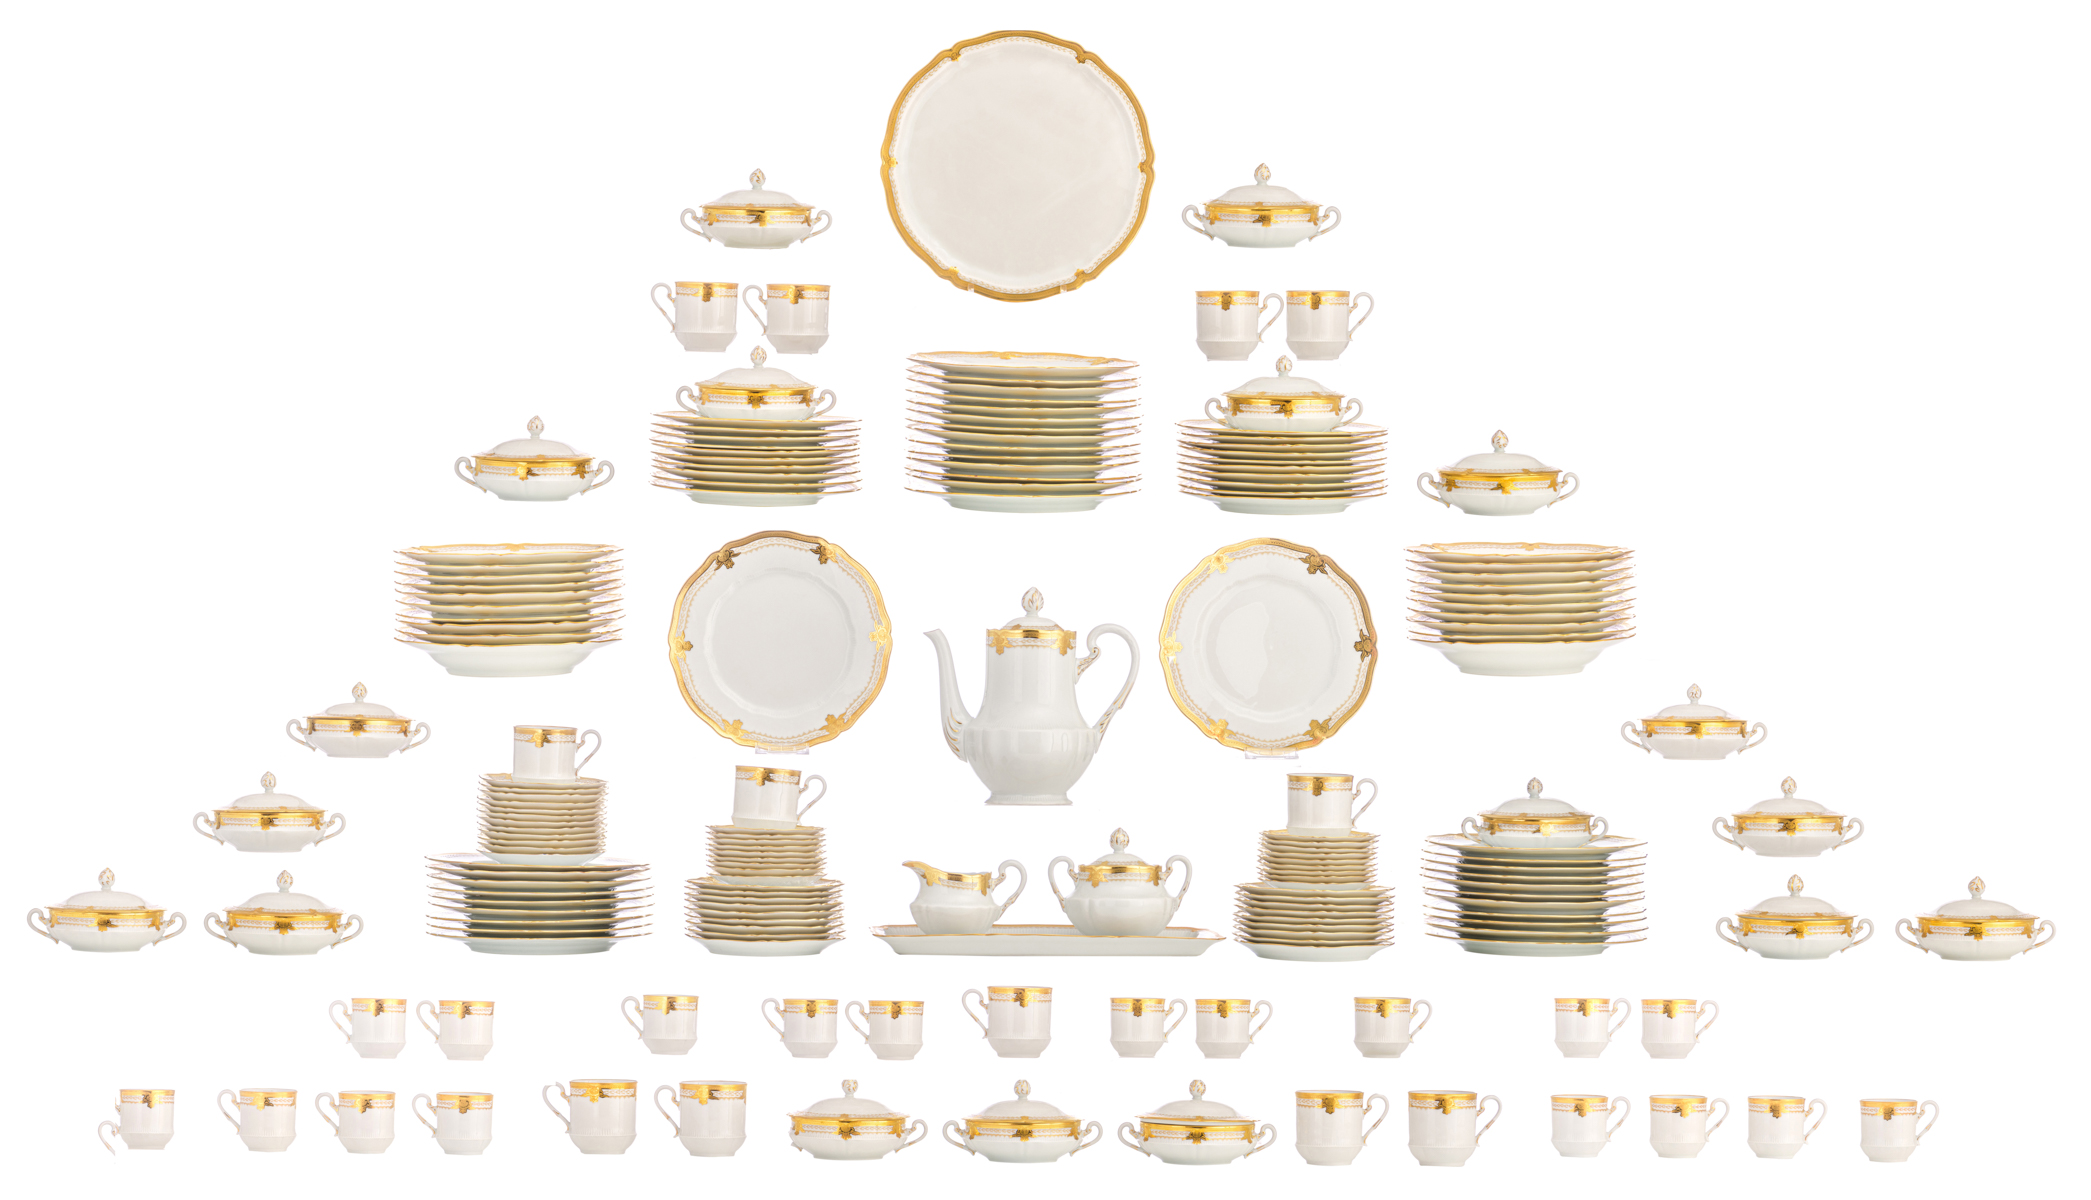 A completely gilt decorated Limoges porcelain dinner and coffee service, marked 'Haviland France', 2